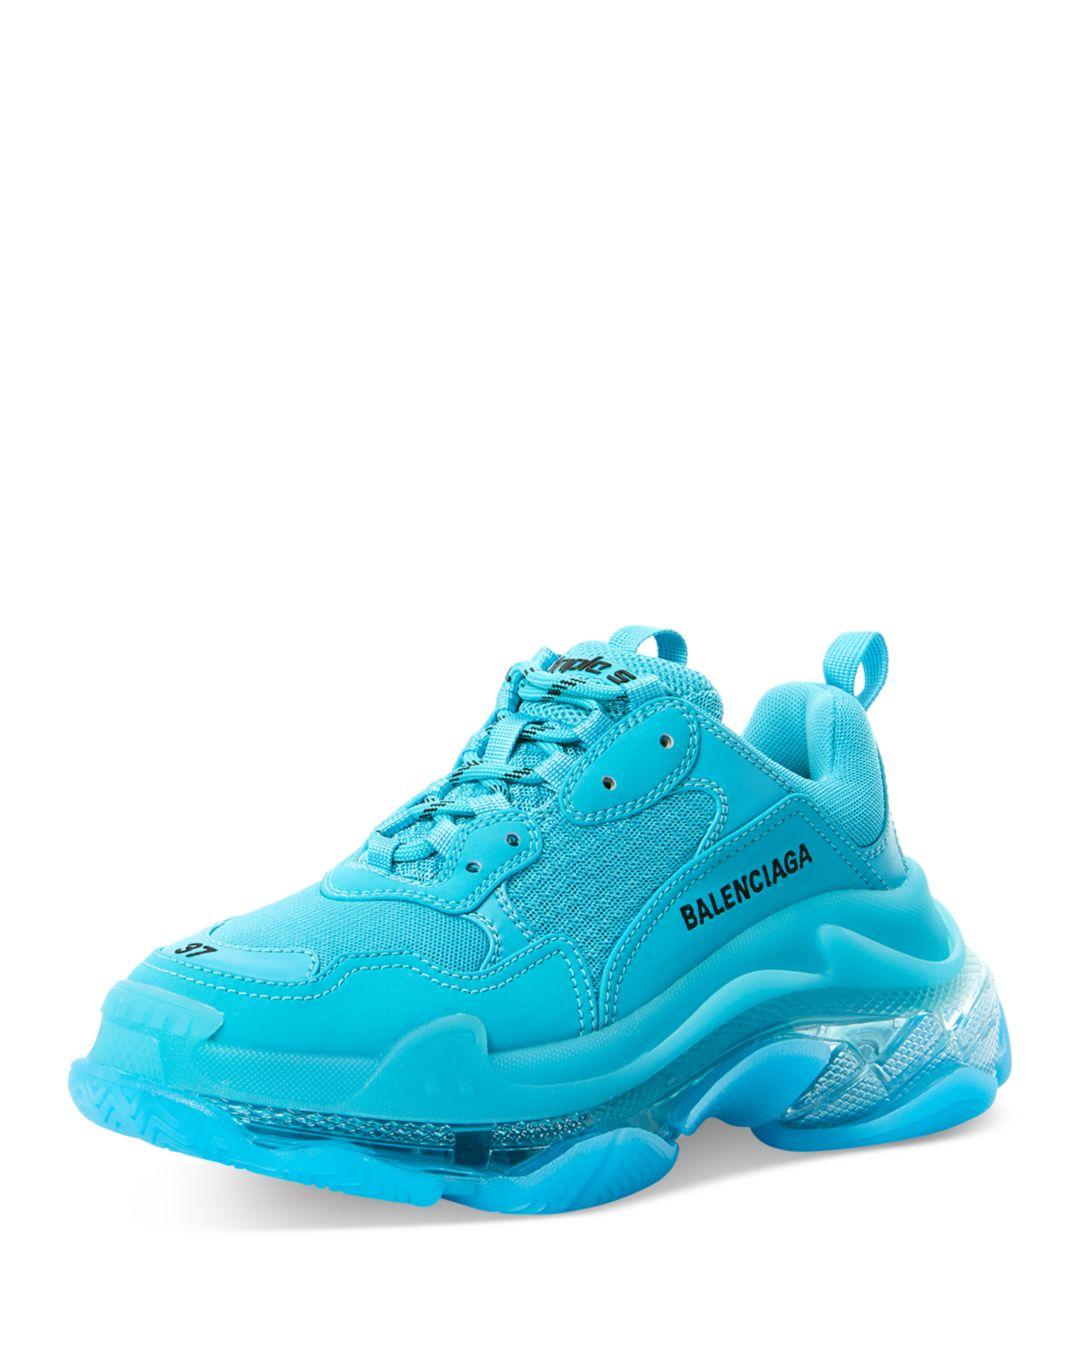 Balenciaga Synthetic Triple S Clear Sole Chunky Sneakers in Turquoise/ Turquoise (Blue) | Lyst